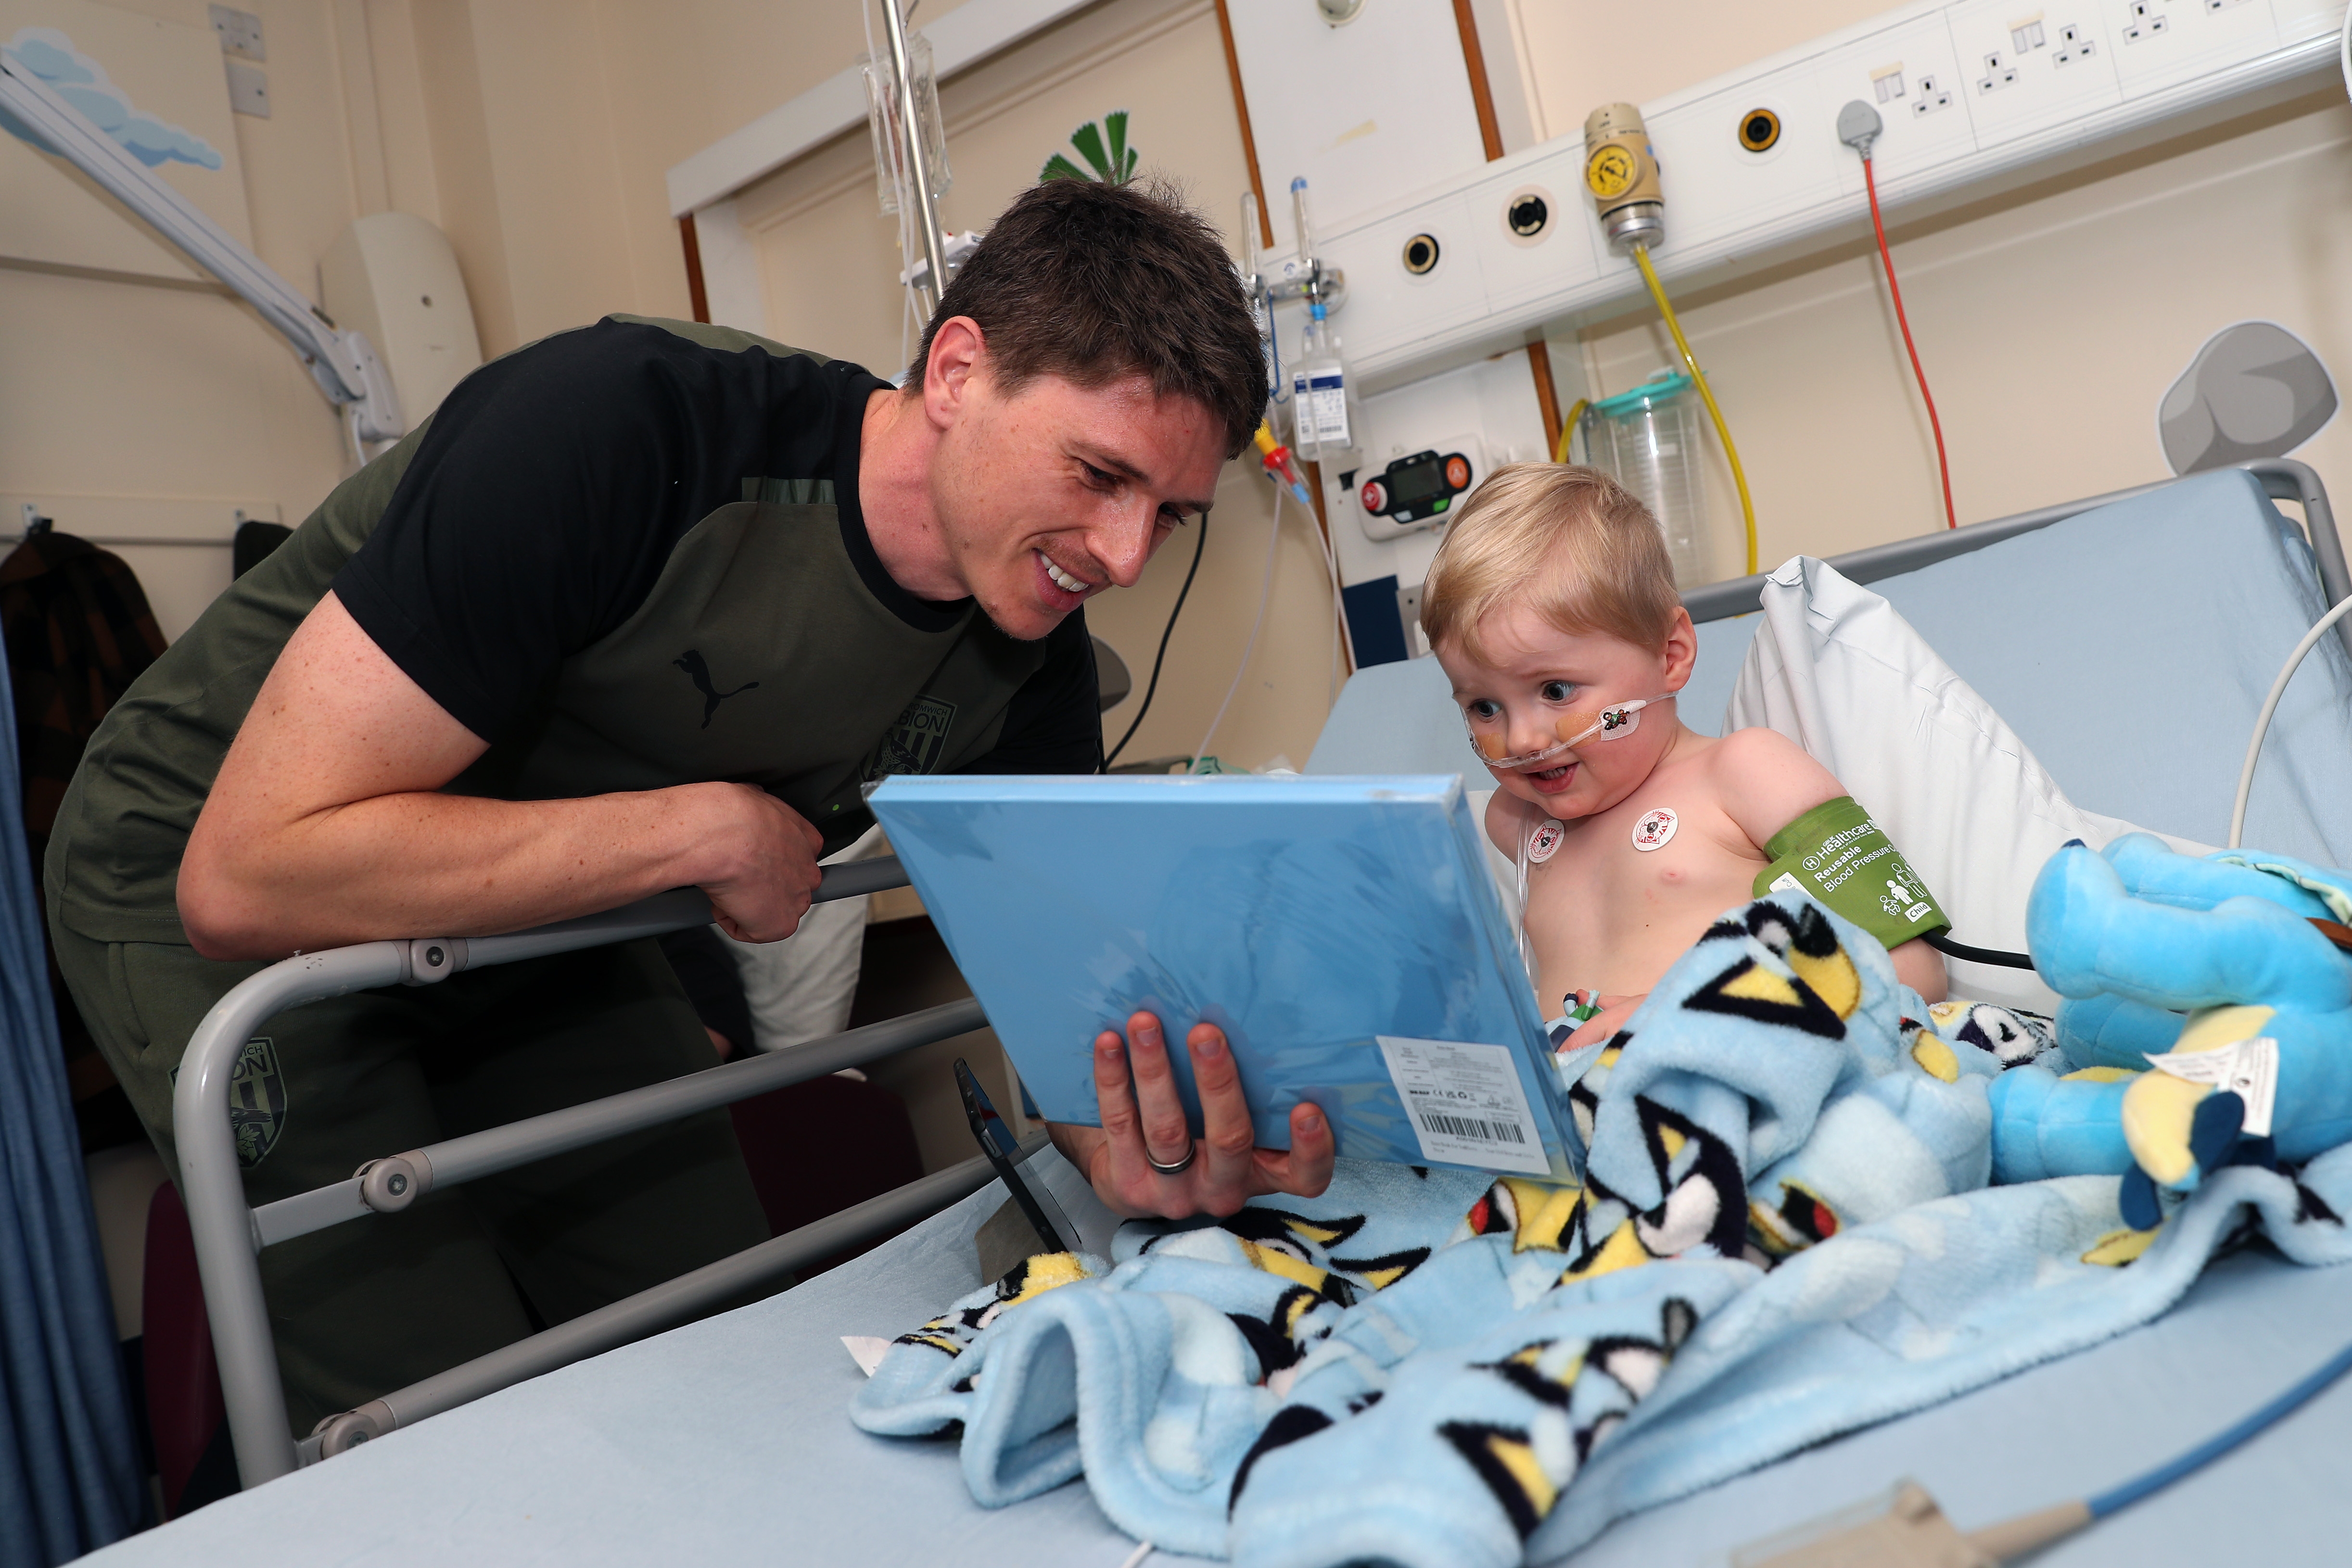 Adam Reach meets a young patient at Sandwell General Hospital